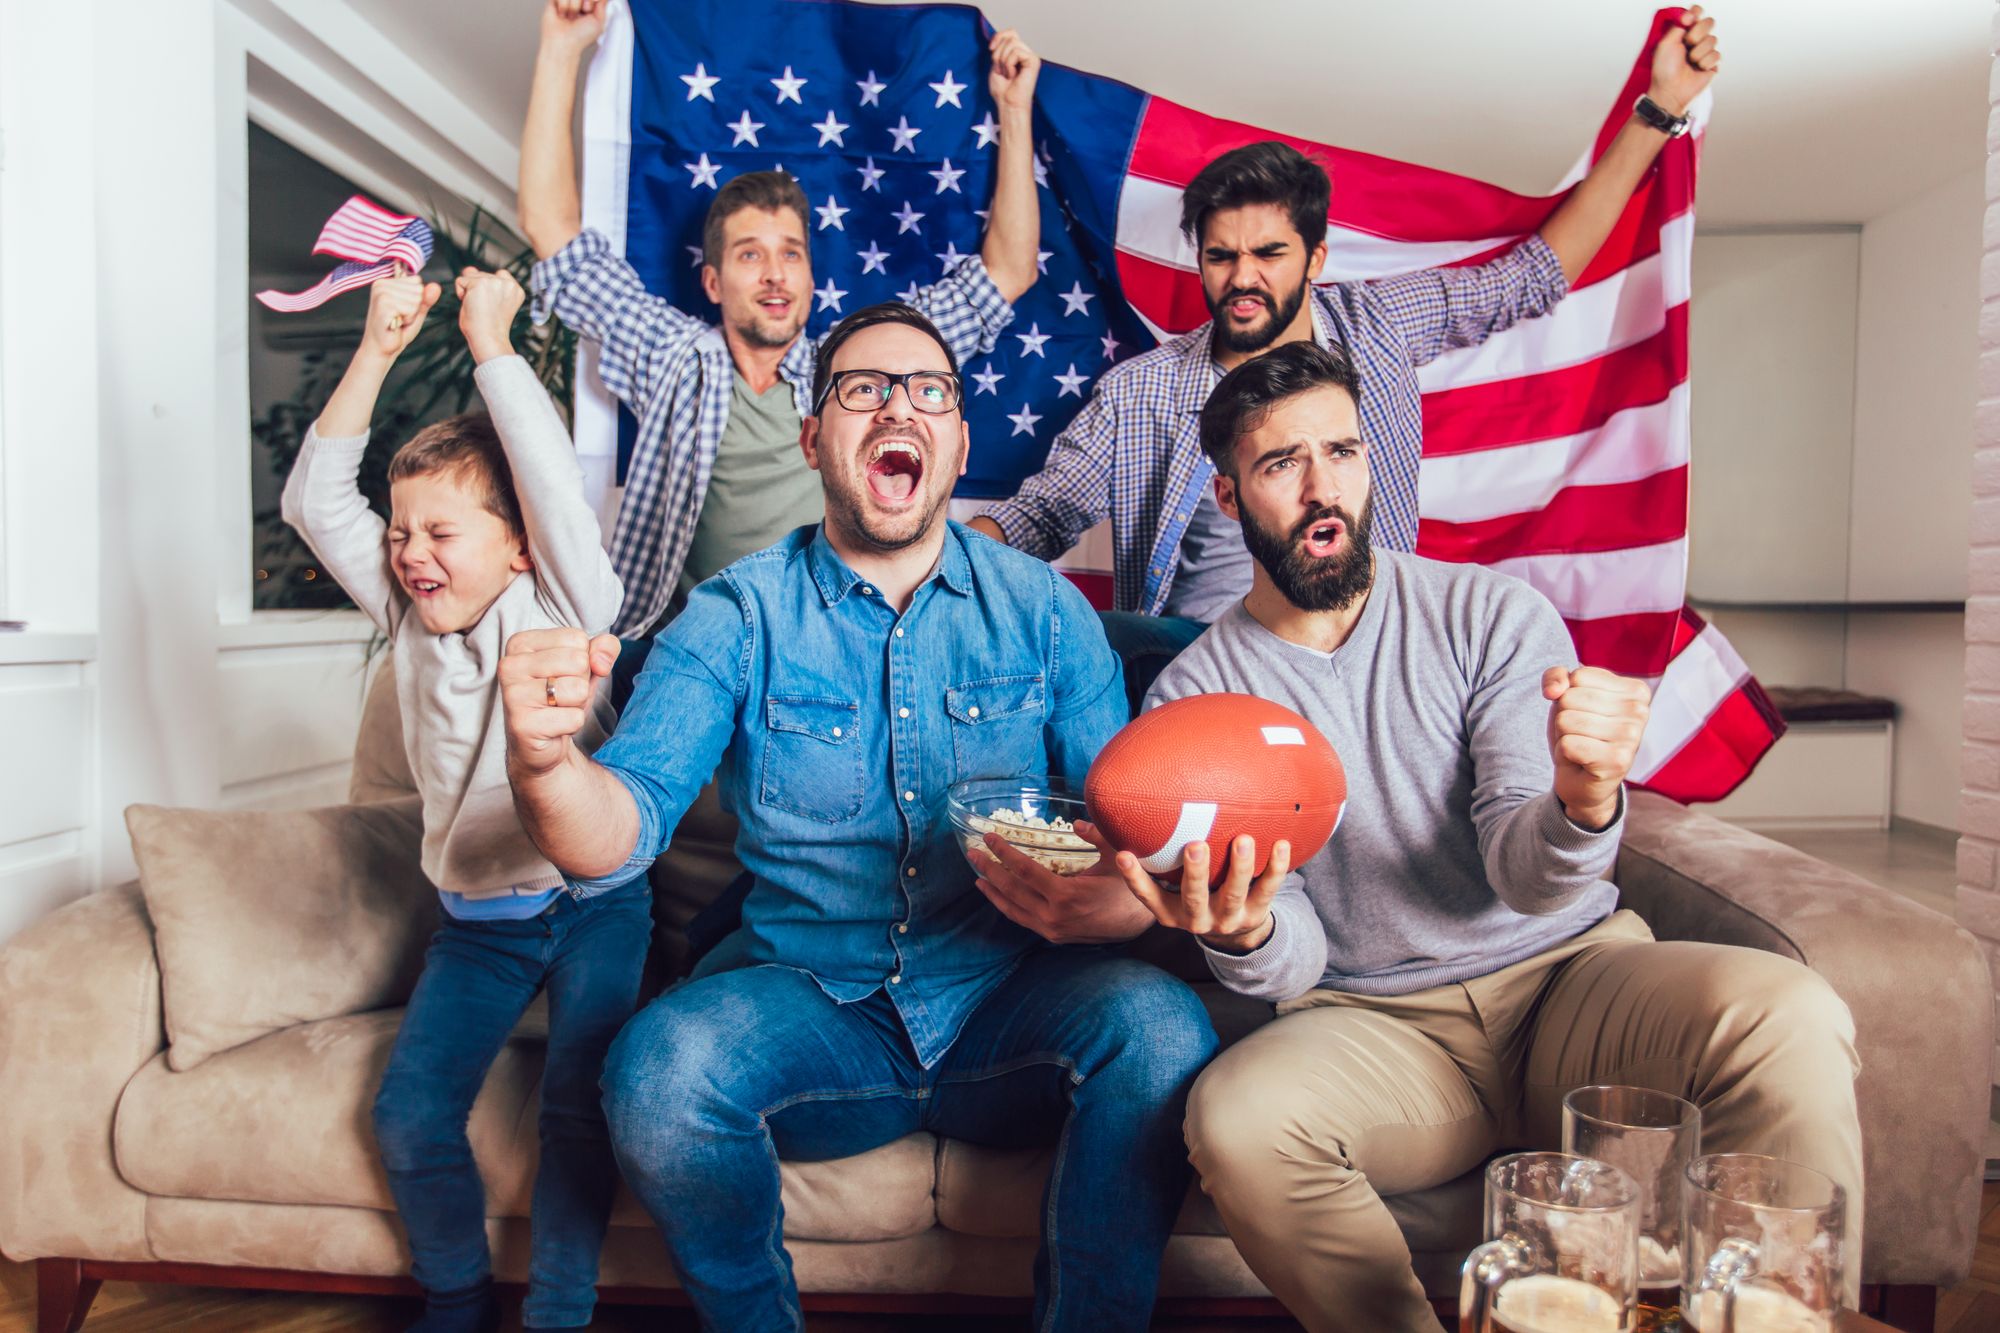 America’s love of football: Why people prefer watching football rather than playing it